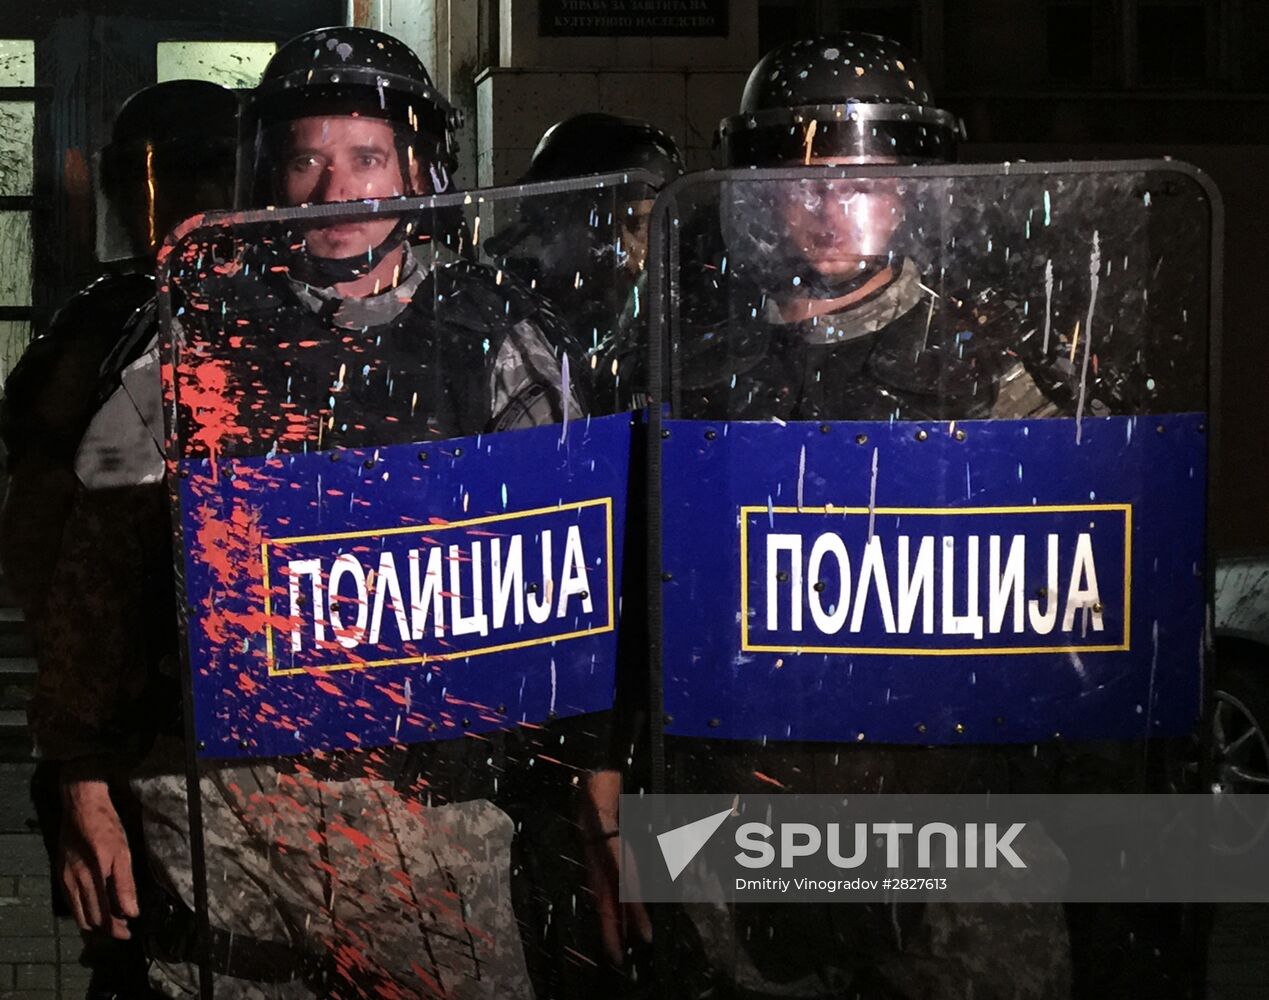 Protests in Macedonia